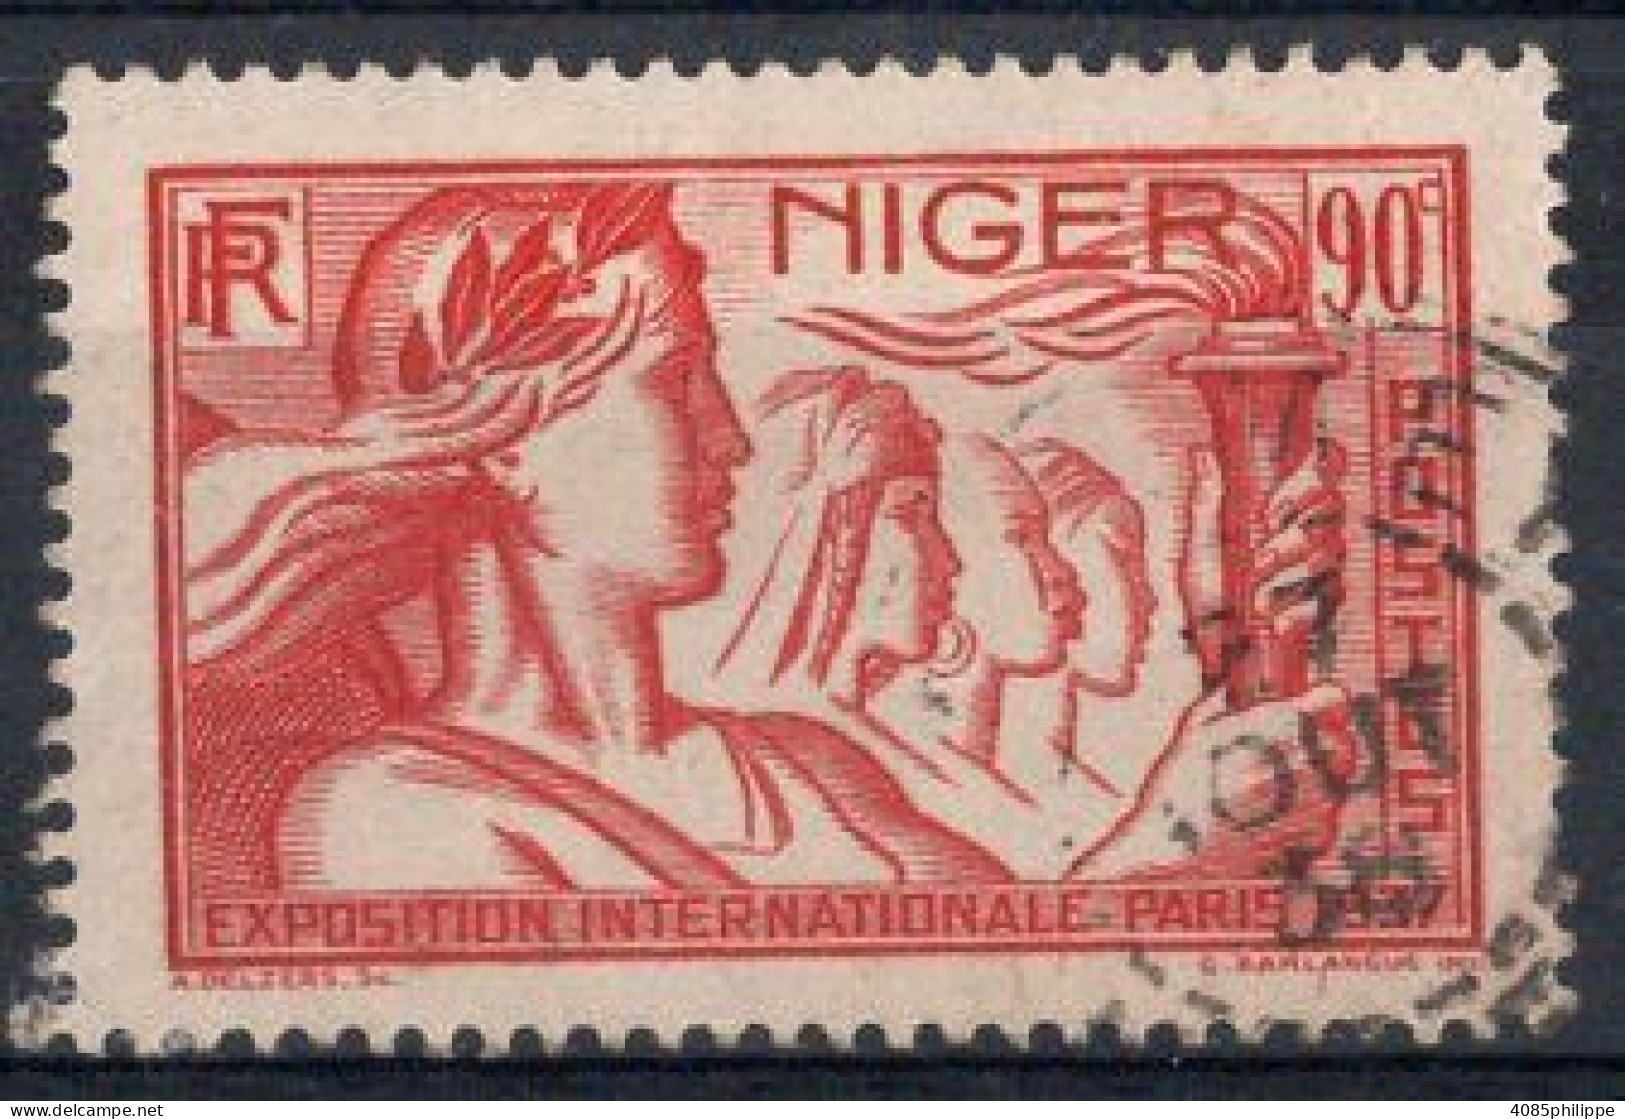 NIGER Timbre-poste N°61 Oblitéré TB Cote : 2.75€ - Used Stamps